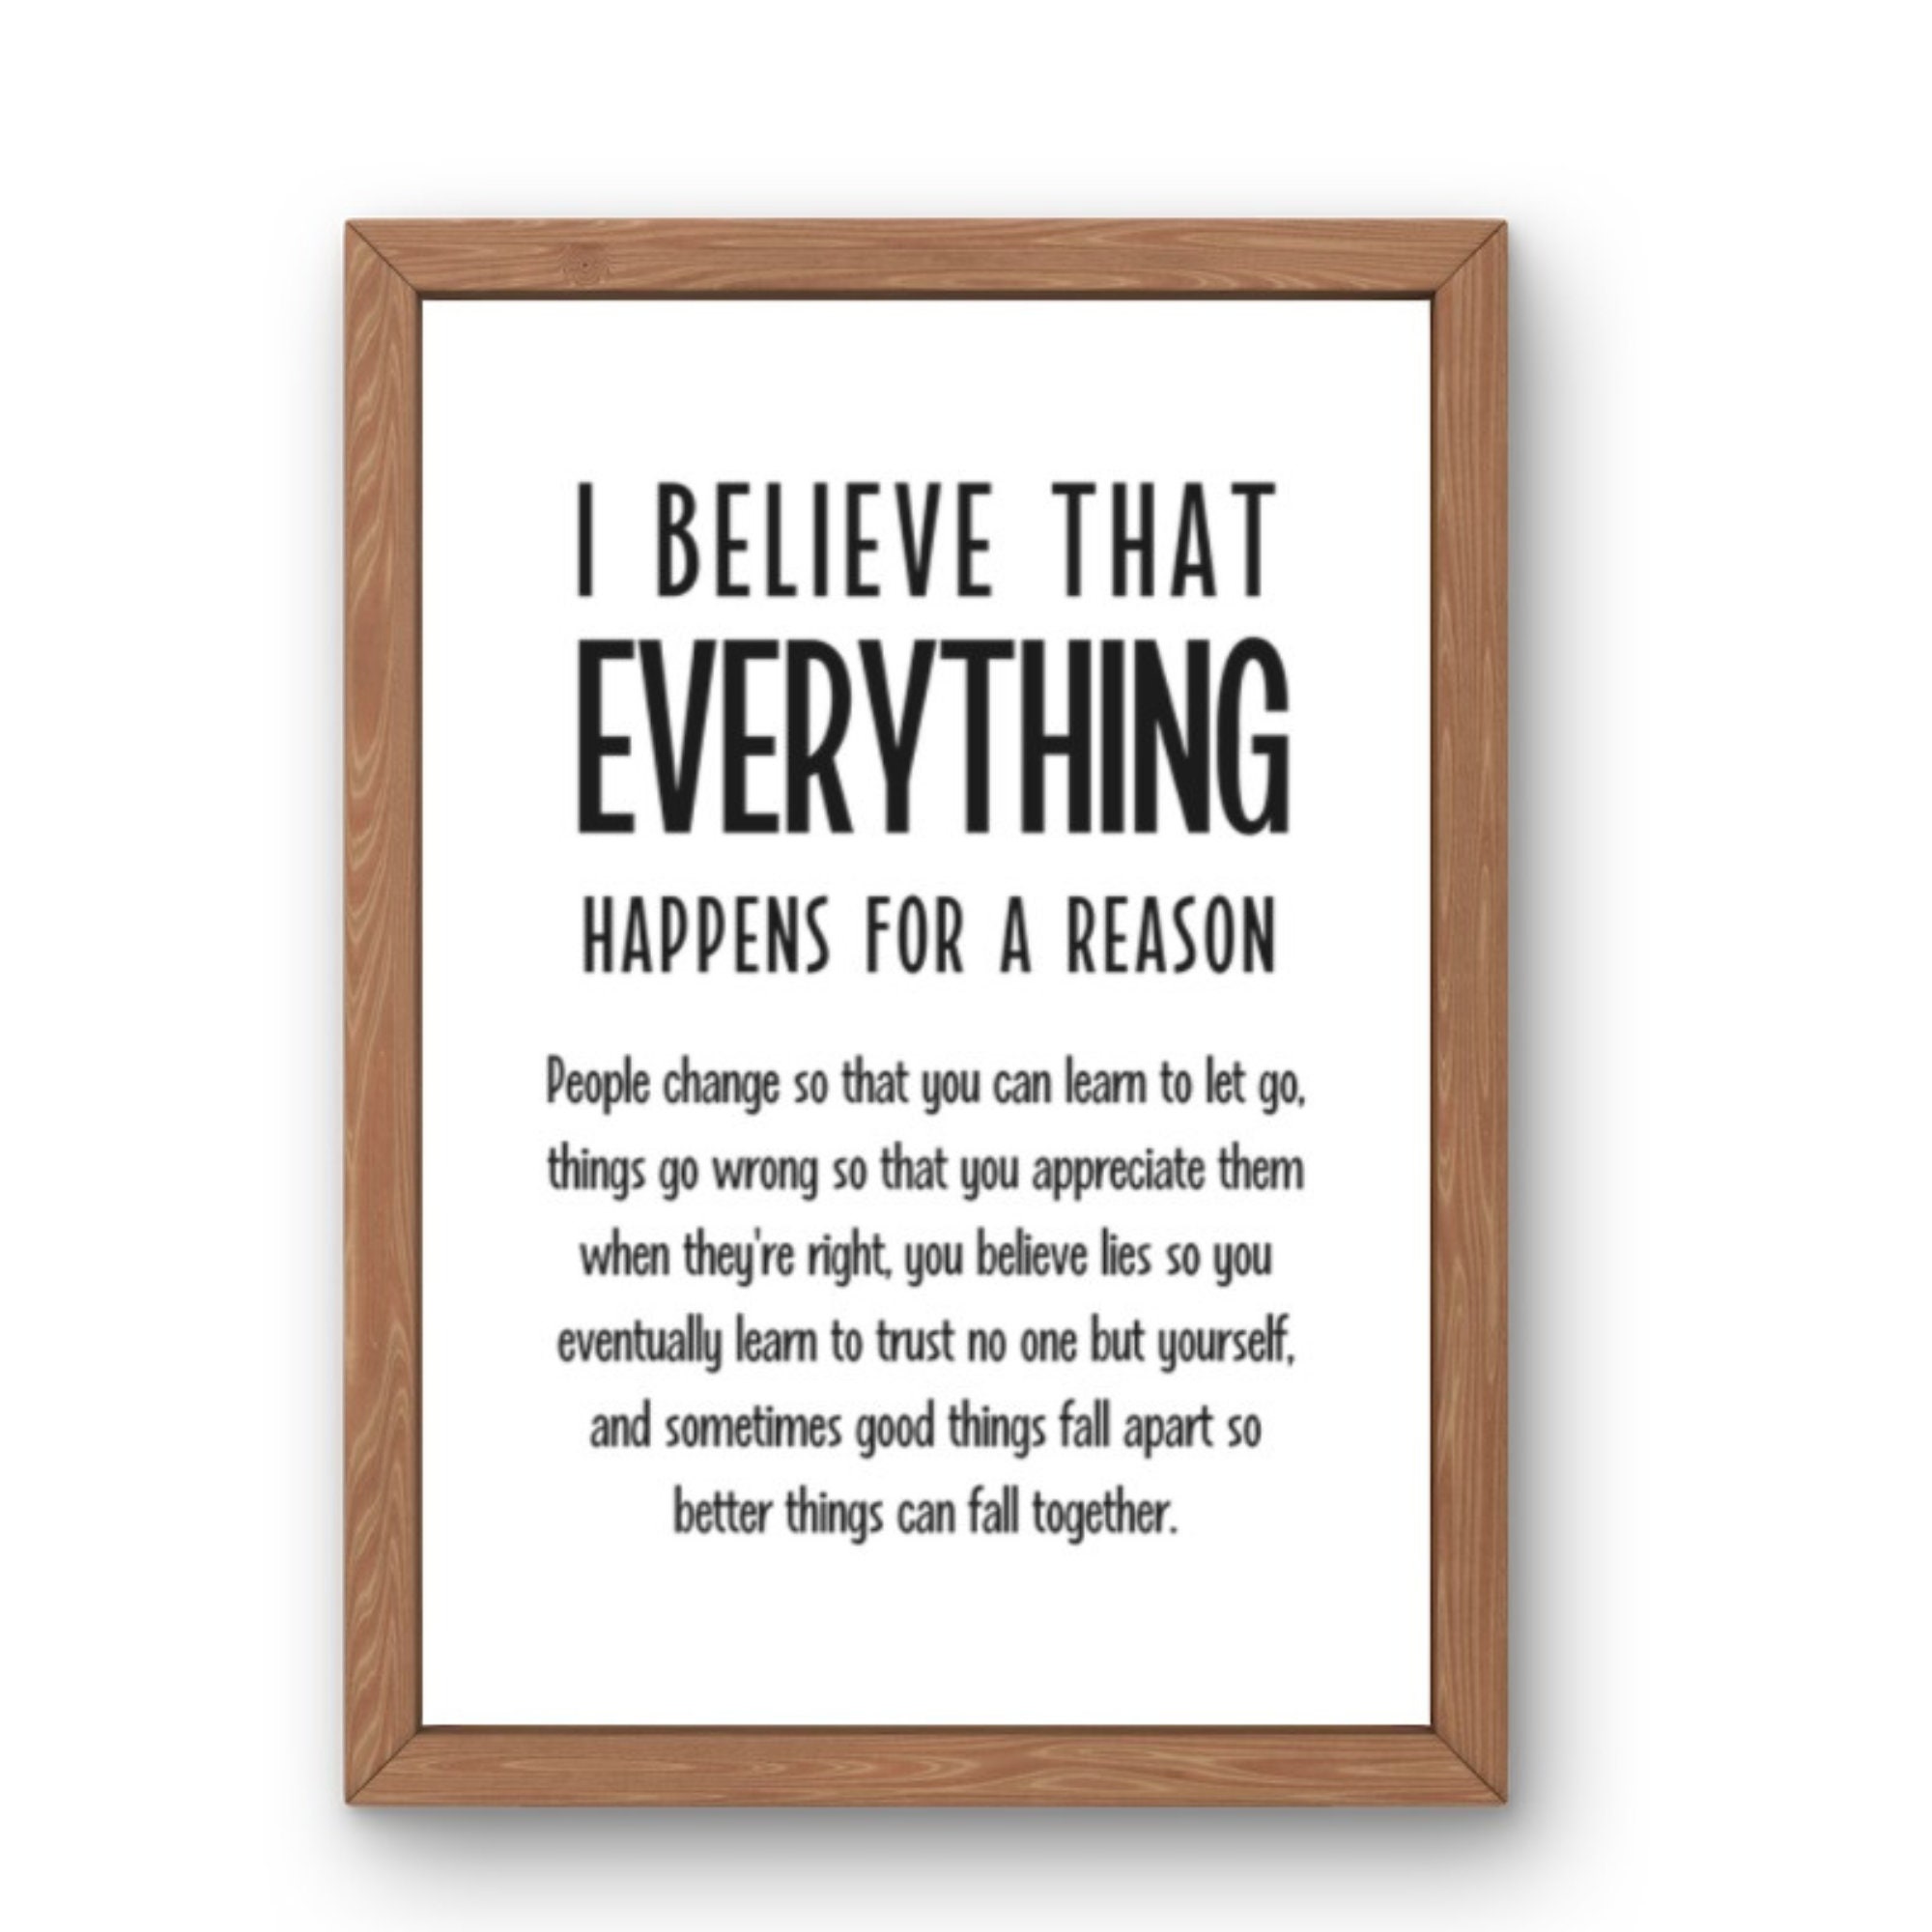 We Believe That Everything Happens for a Reason!